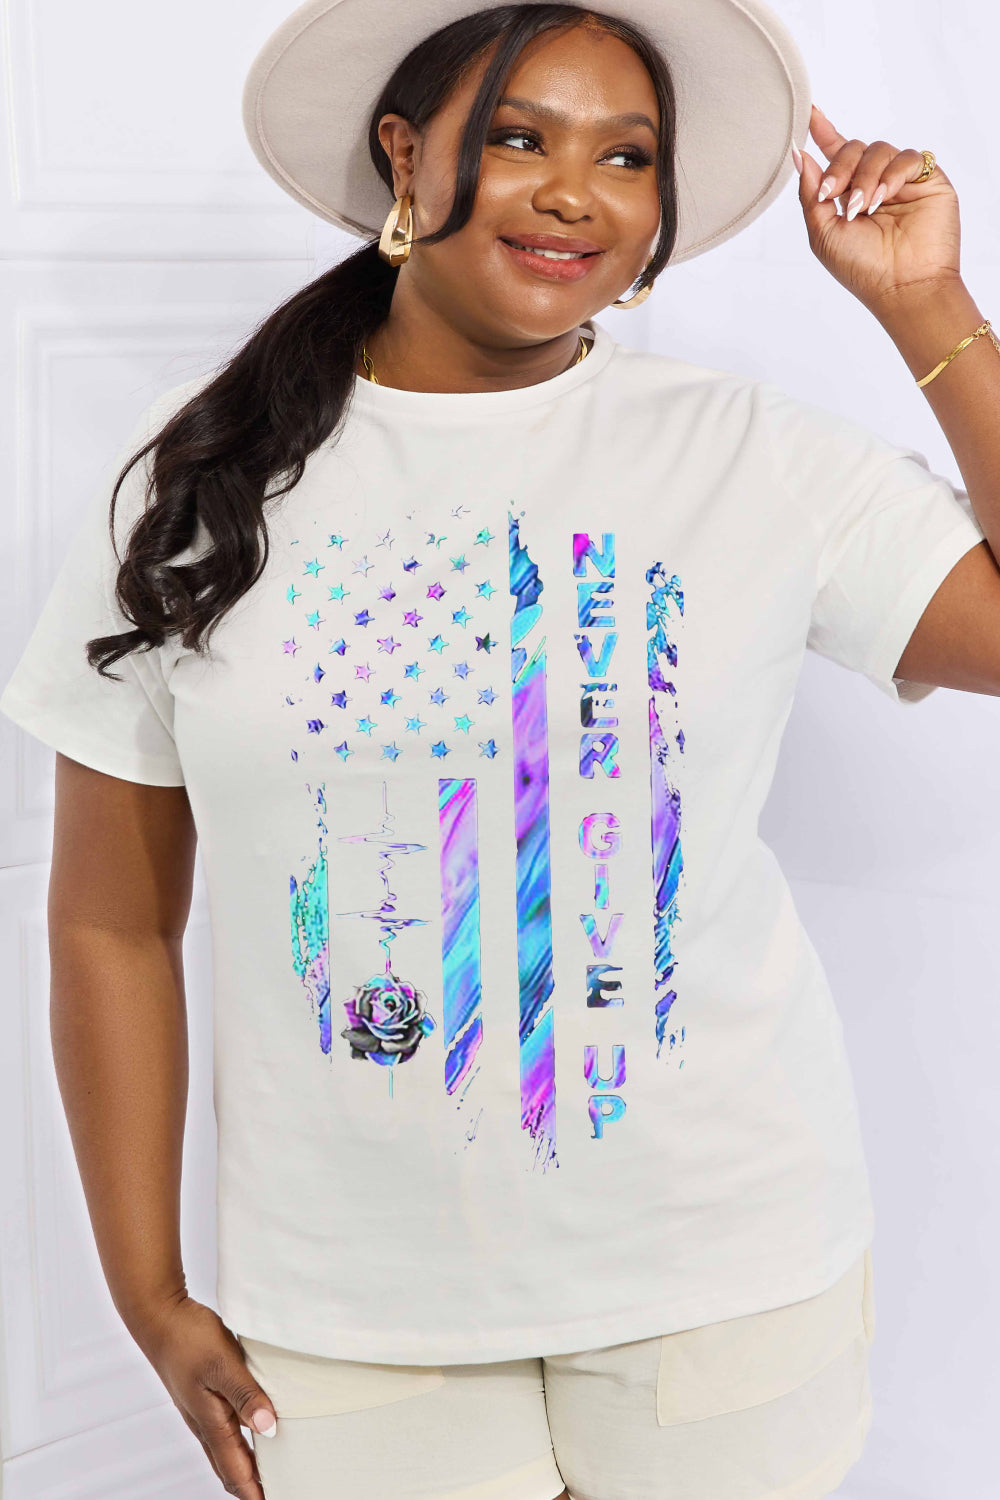 NEVER GIVE UP Graphic Cotton Tee - T-Shirts - Shirts & Tops - 21 - 2024